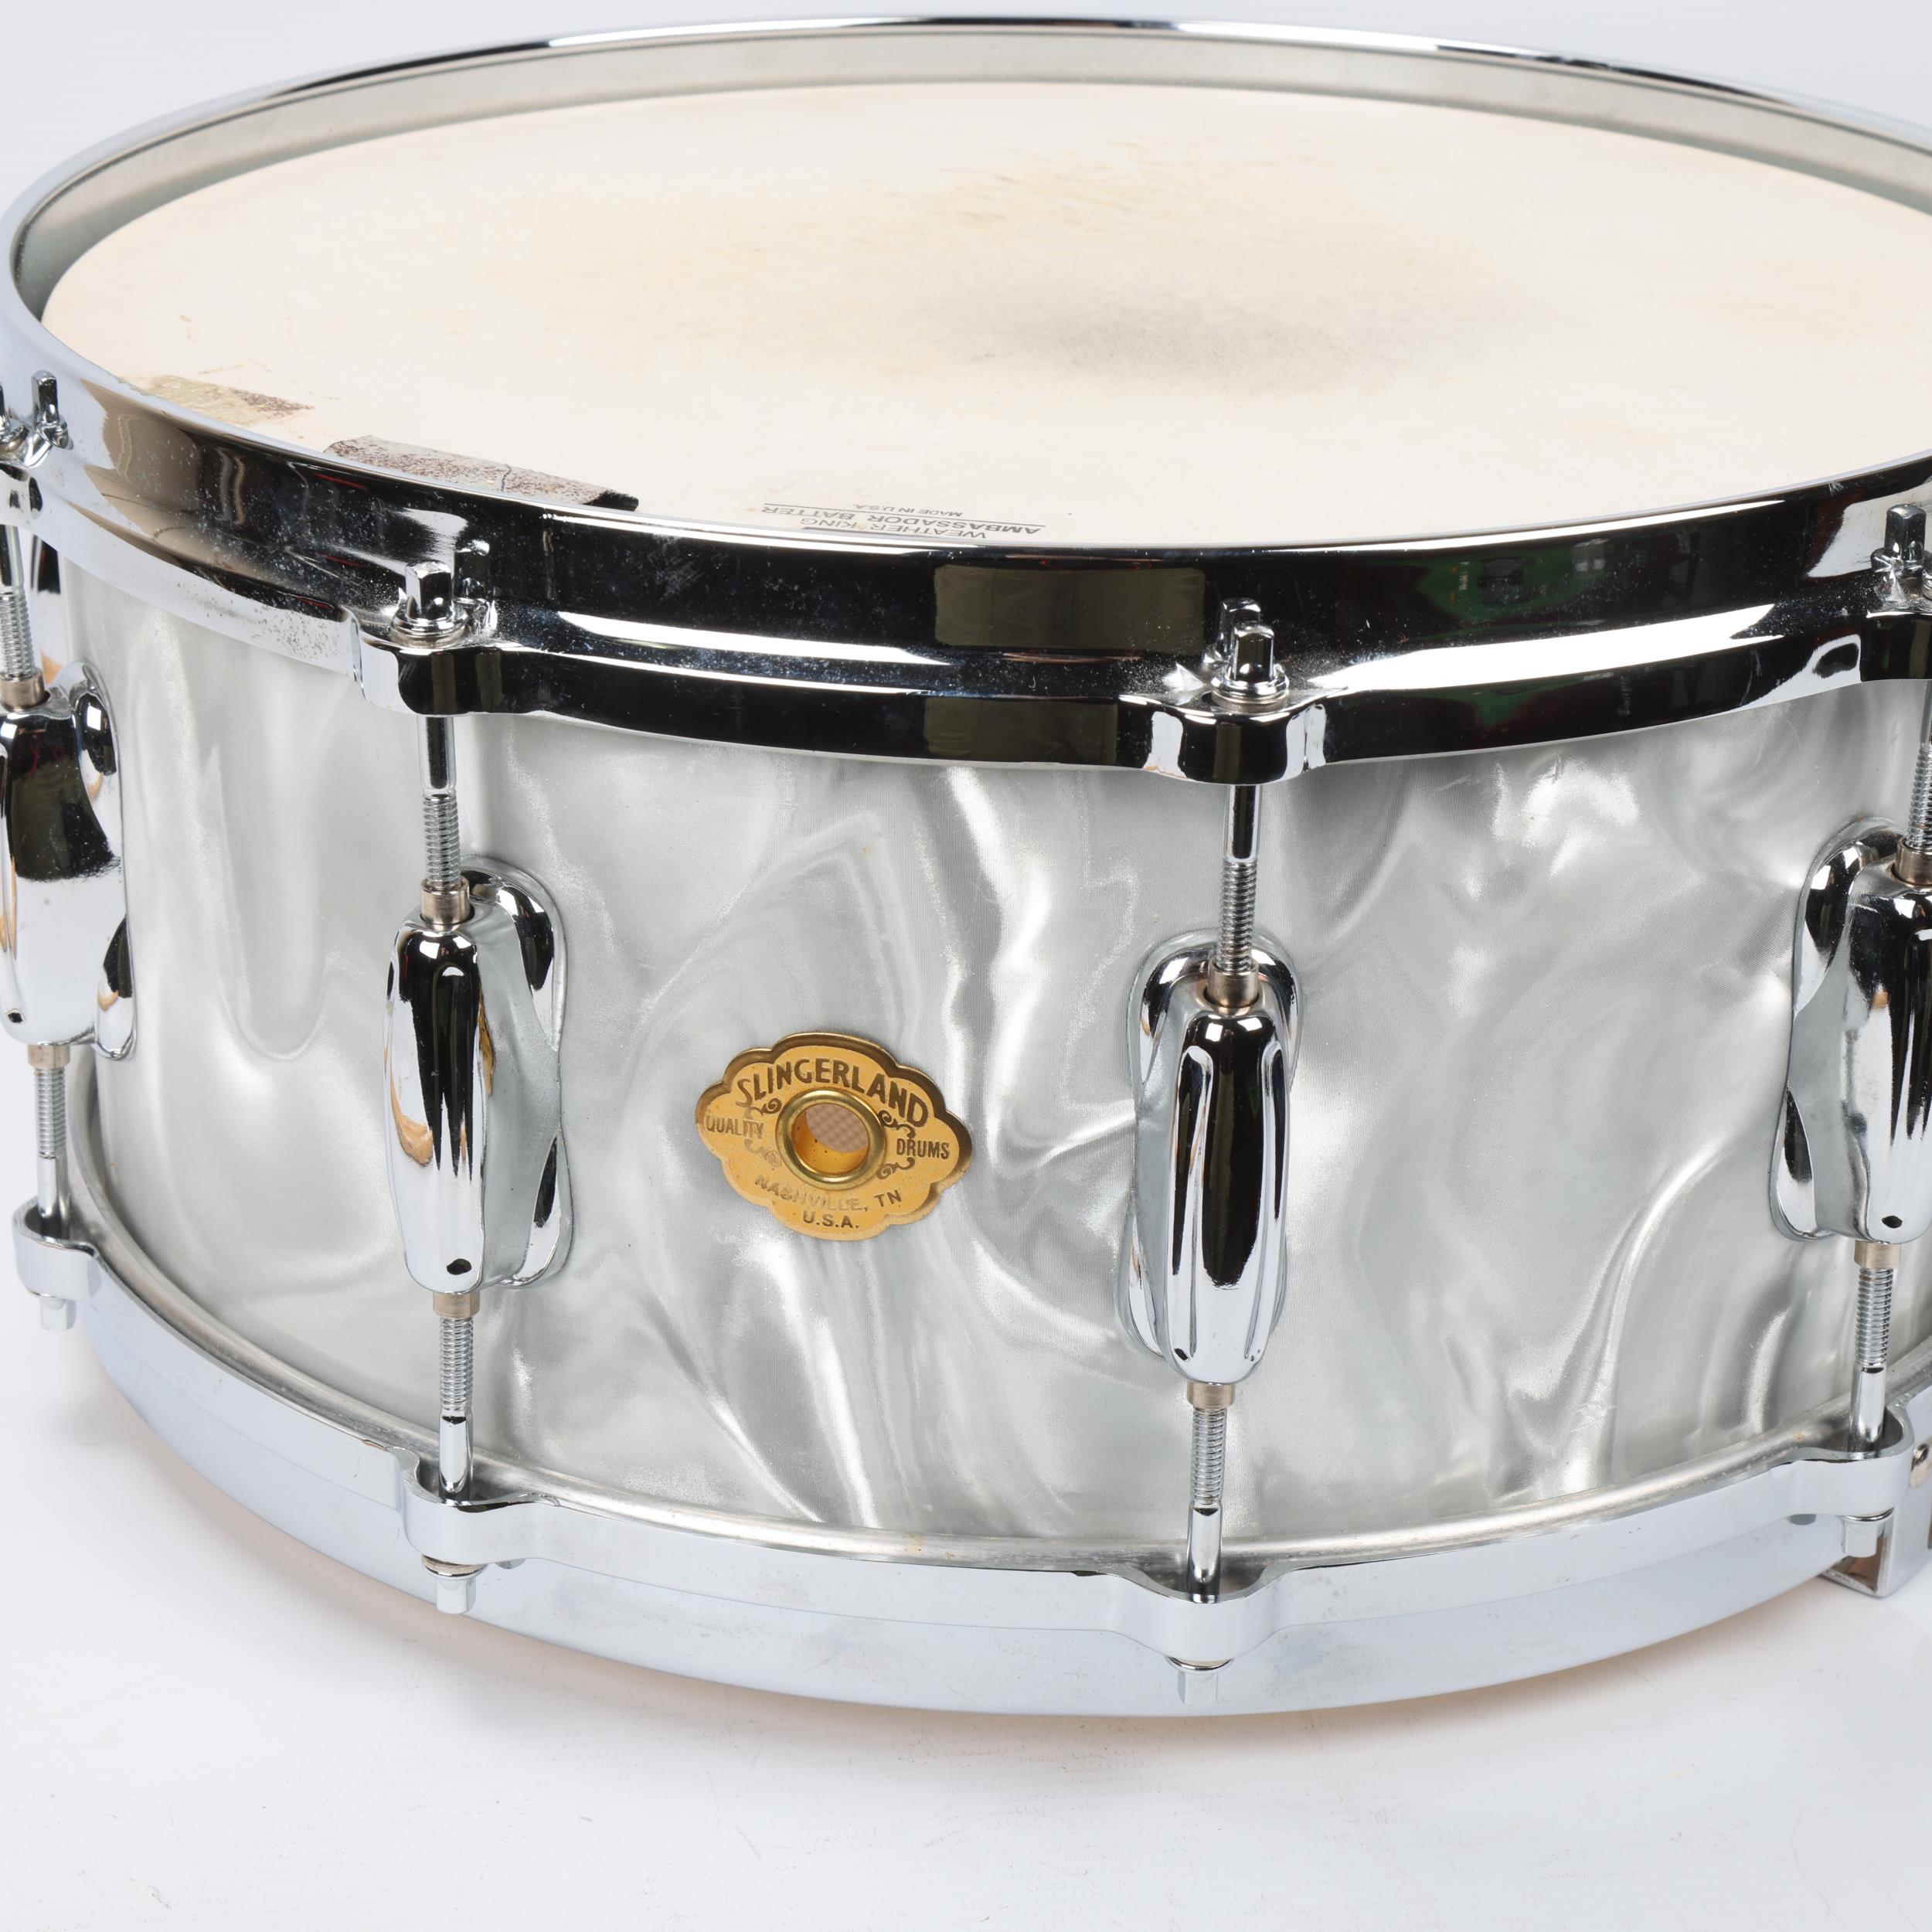 A Pearl Finish SLINGERLAND USA SNARE DRUM owned by MITCH MITCHELL of the JIMI HENDRIX EXPERIENCE. - Image 2 of 3